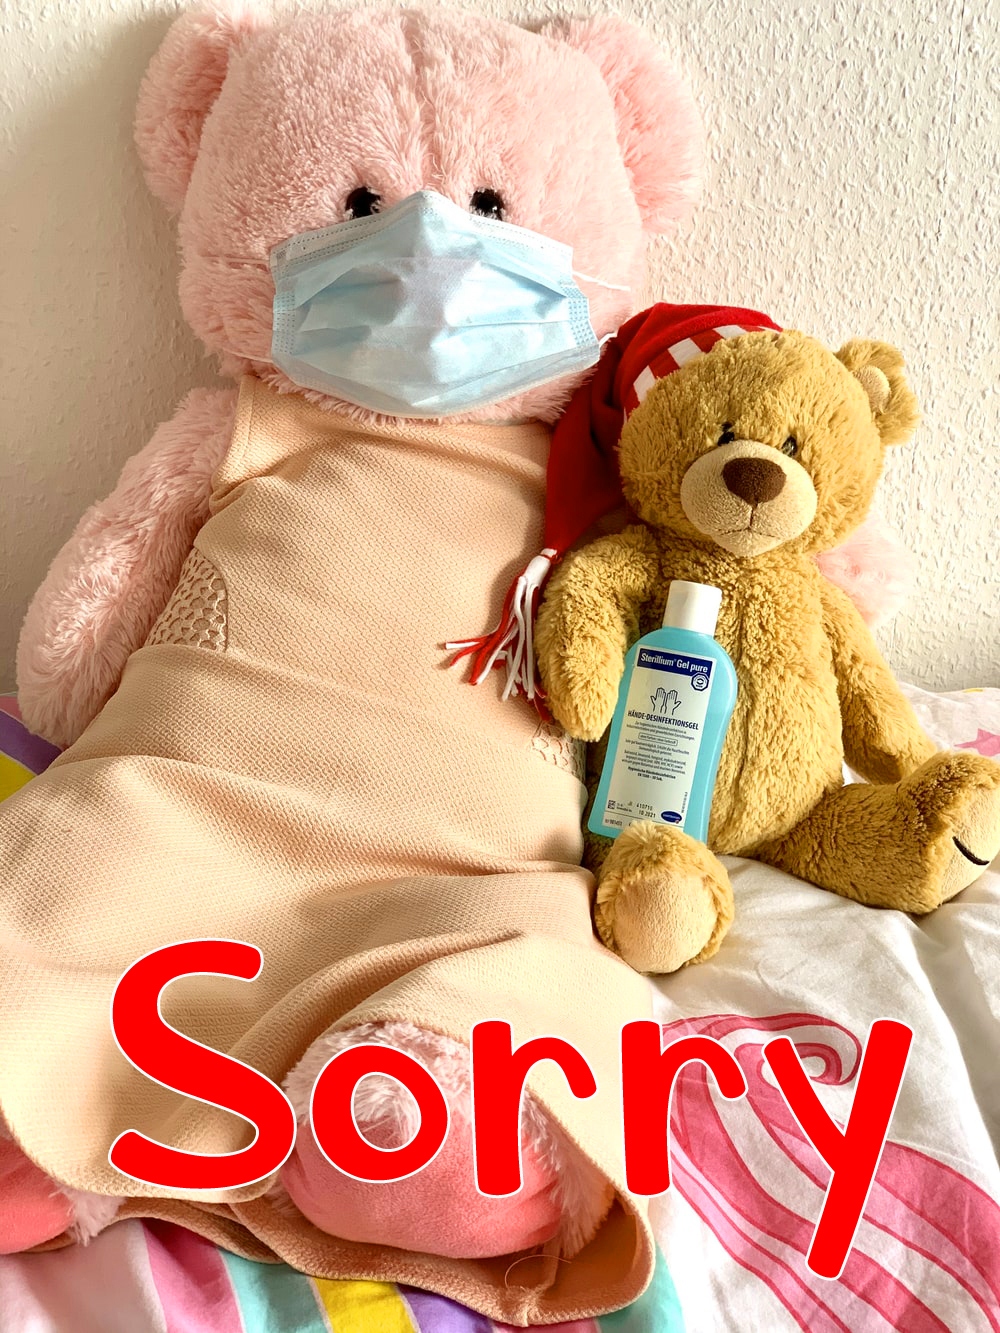 I am Sorry Images Pics Free Download Latest 